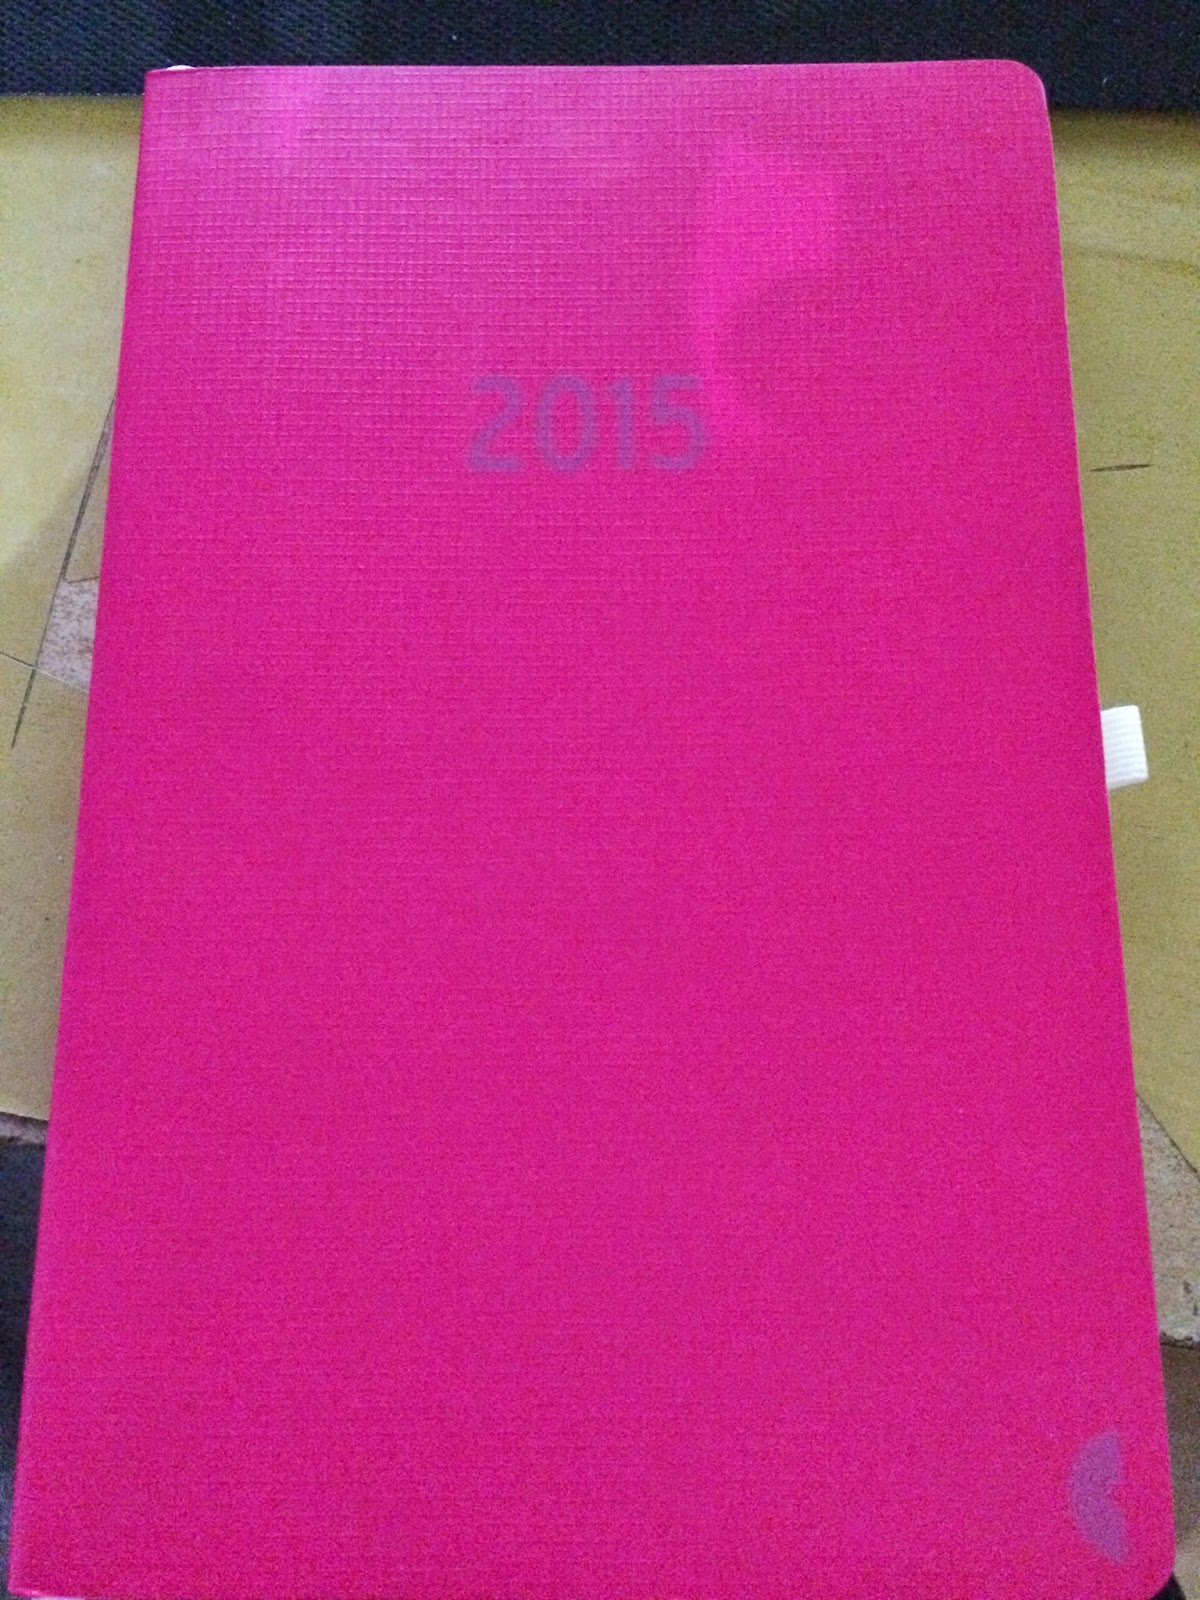 *Werbung* Produkttest Chronobook Colour Edition in Pink by Avery Zweckform 18